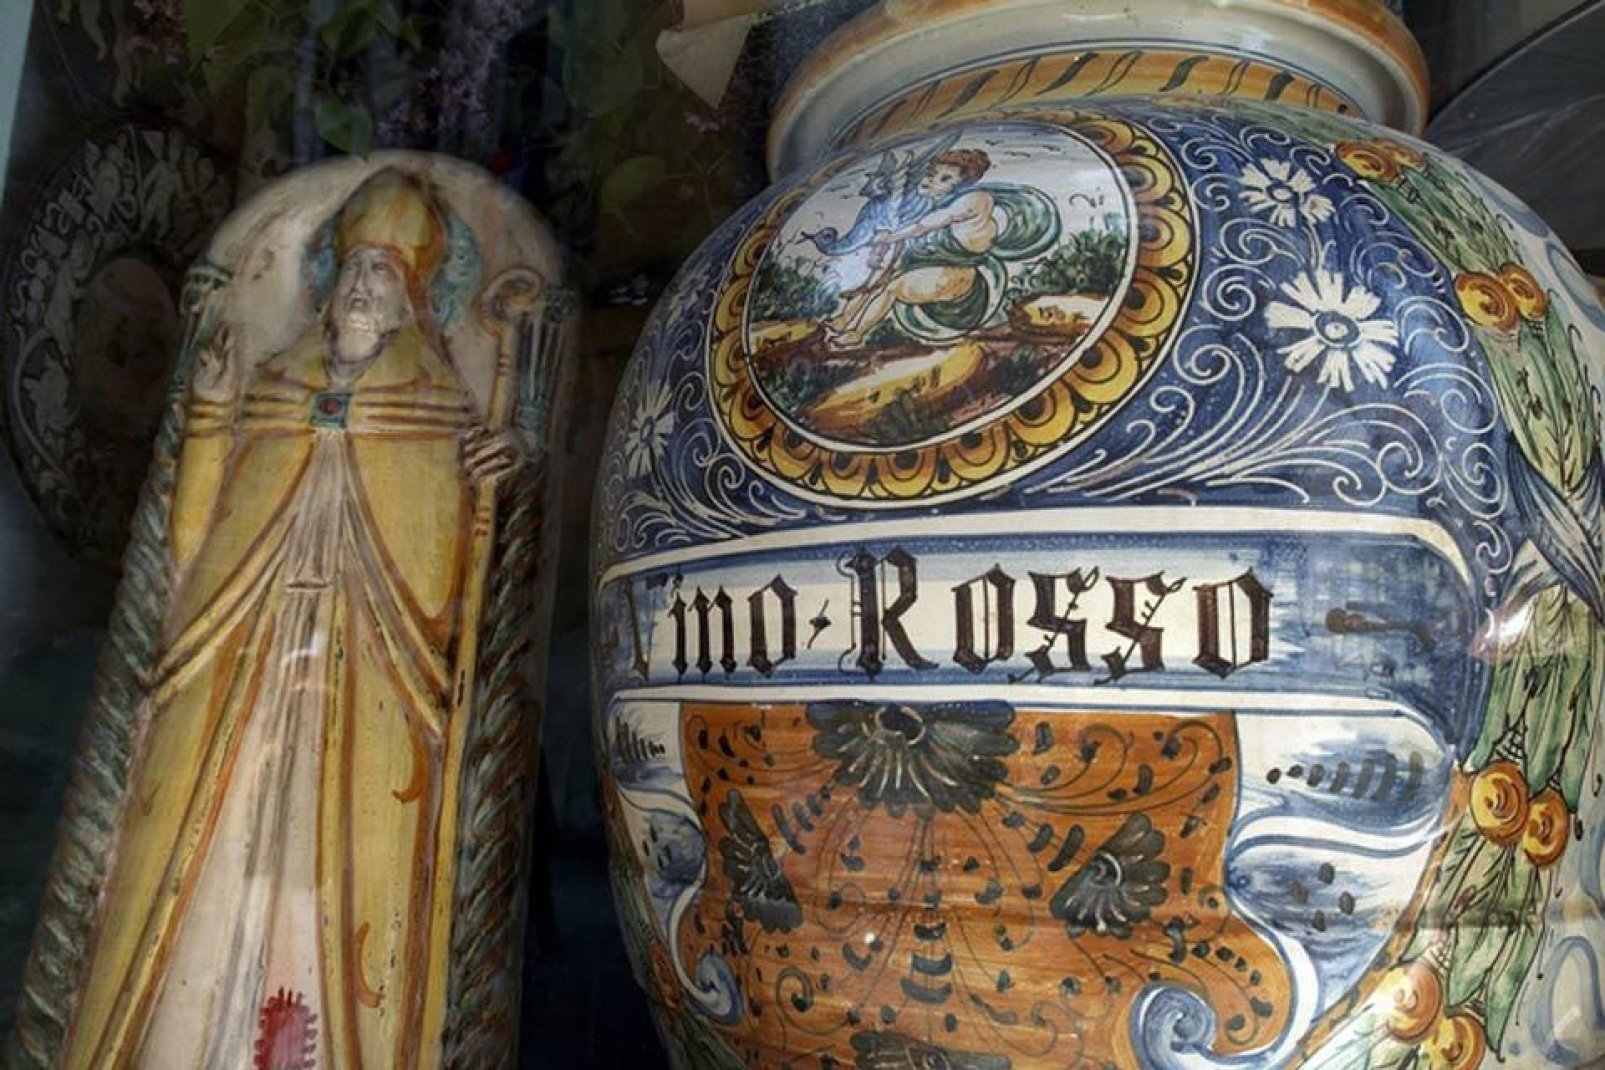 Umbria is known for its production of earthenware and ceramics